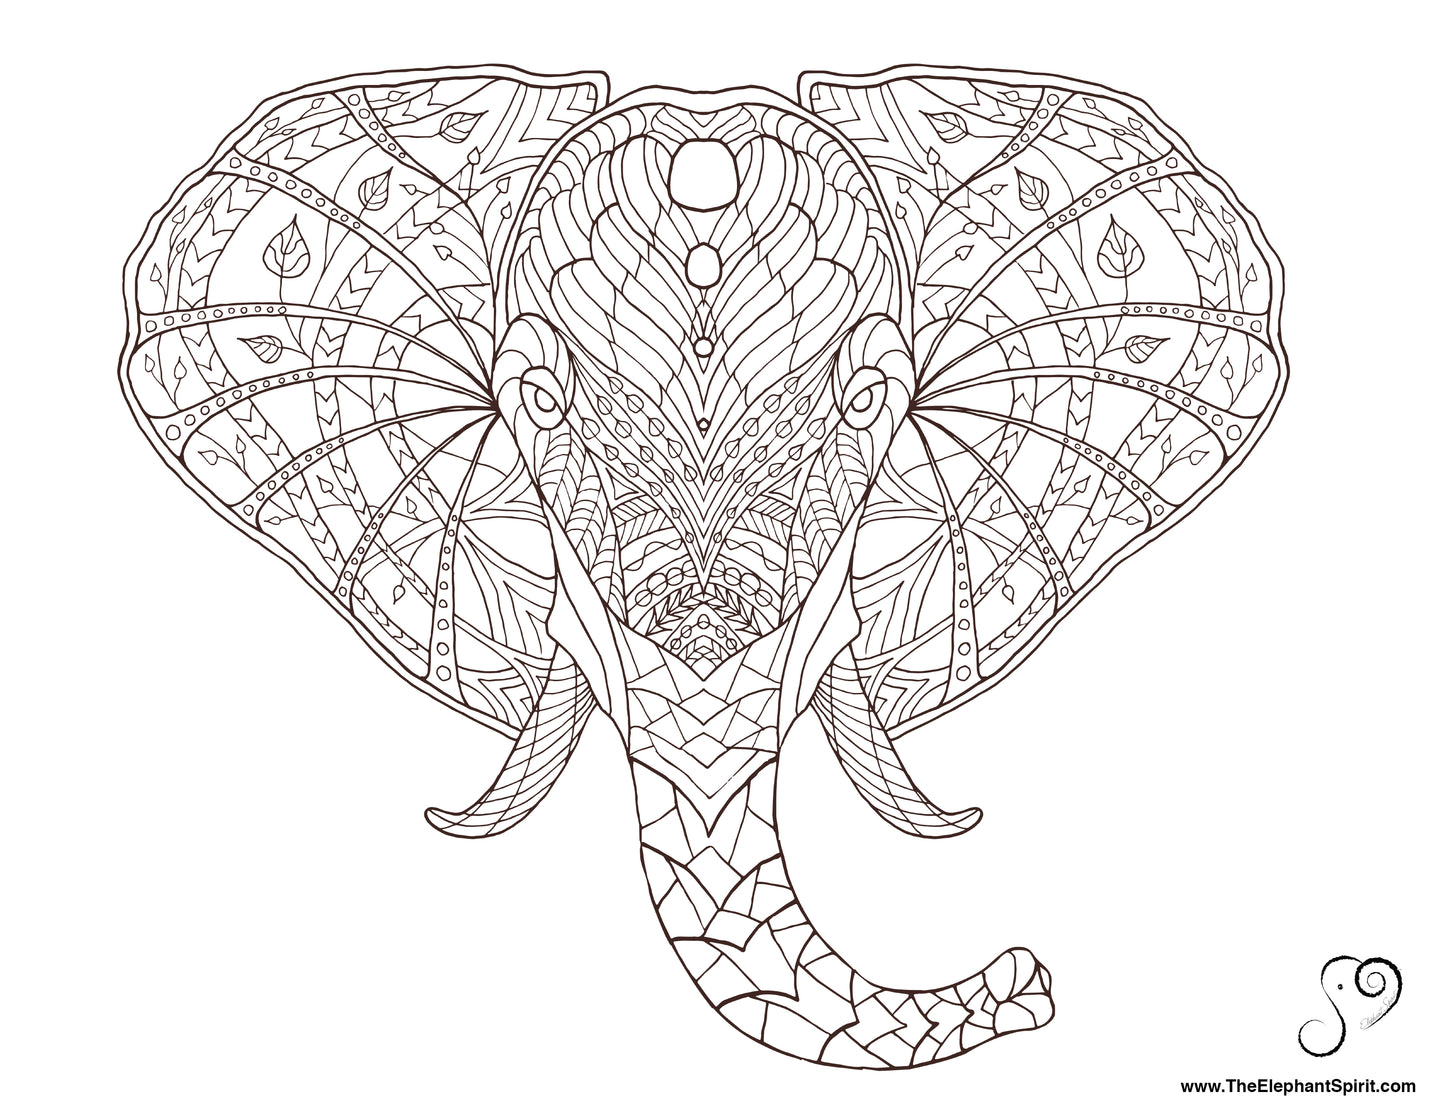 FREE Coloring Page 09-22